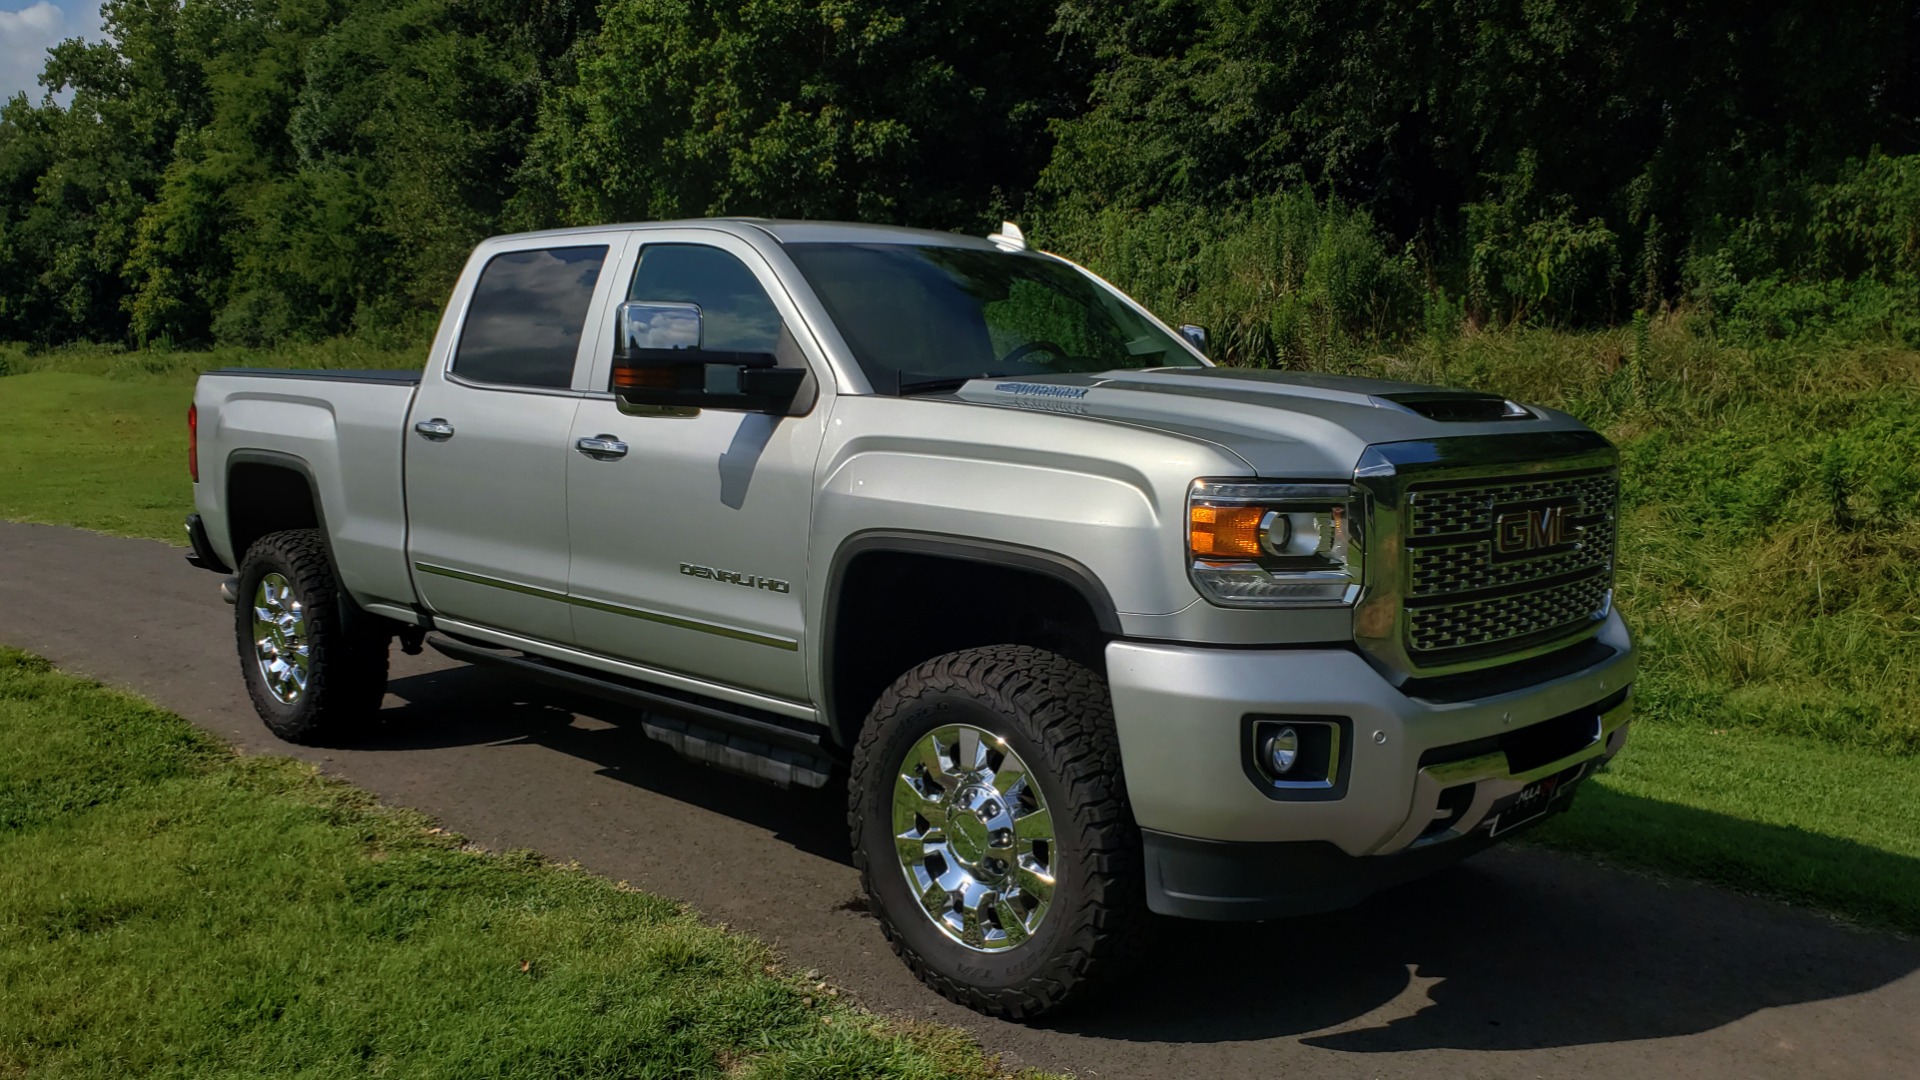 Used 2018 GMC SIERRA 2500HD DENALI 4WD / 6.6L DURAMAX / NAV / SUNROOF / BOSE / REARVIEW for sale Sold at Formula Imports in Charlotte NC 28227 14